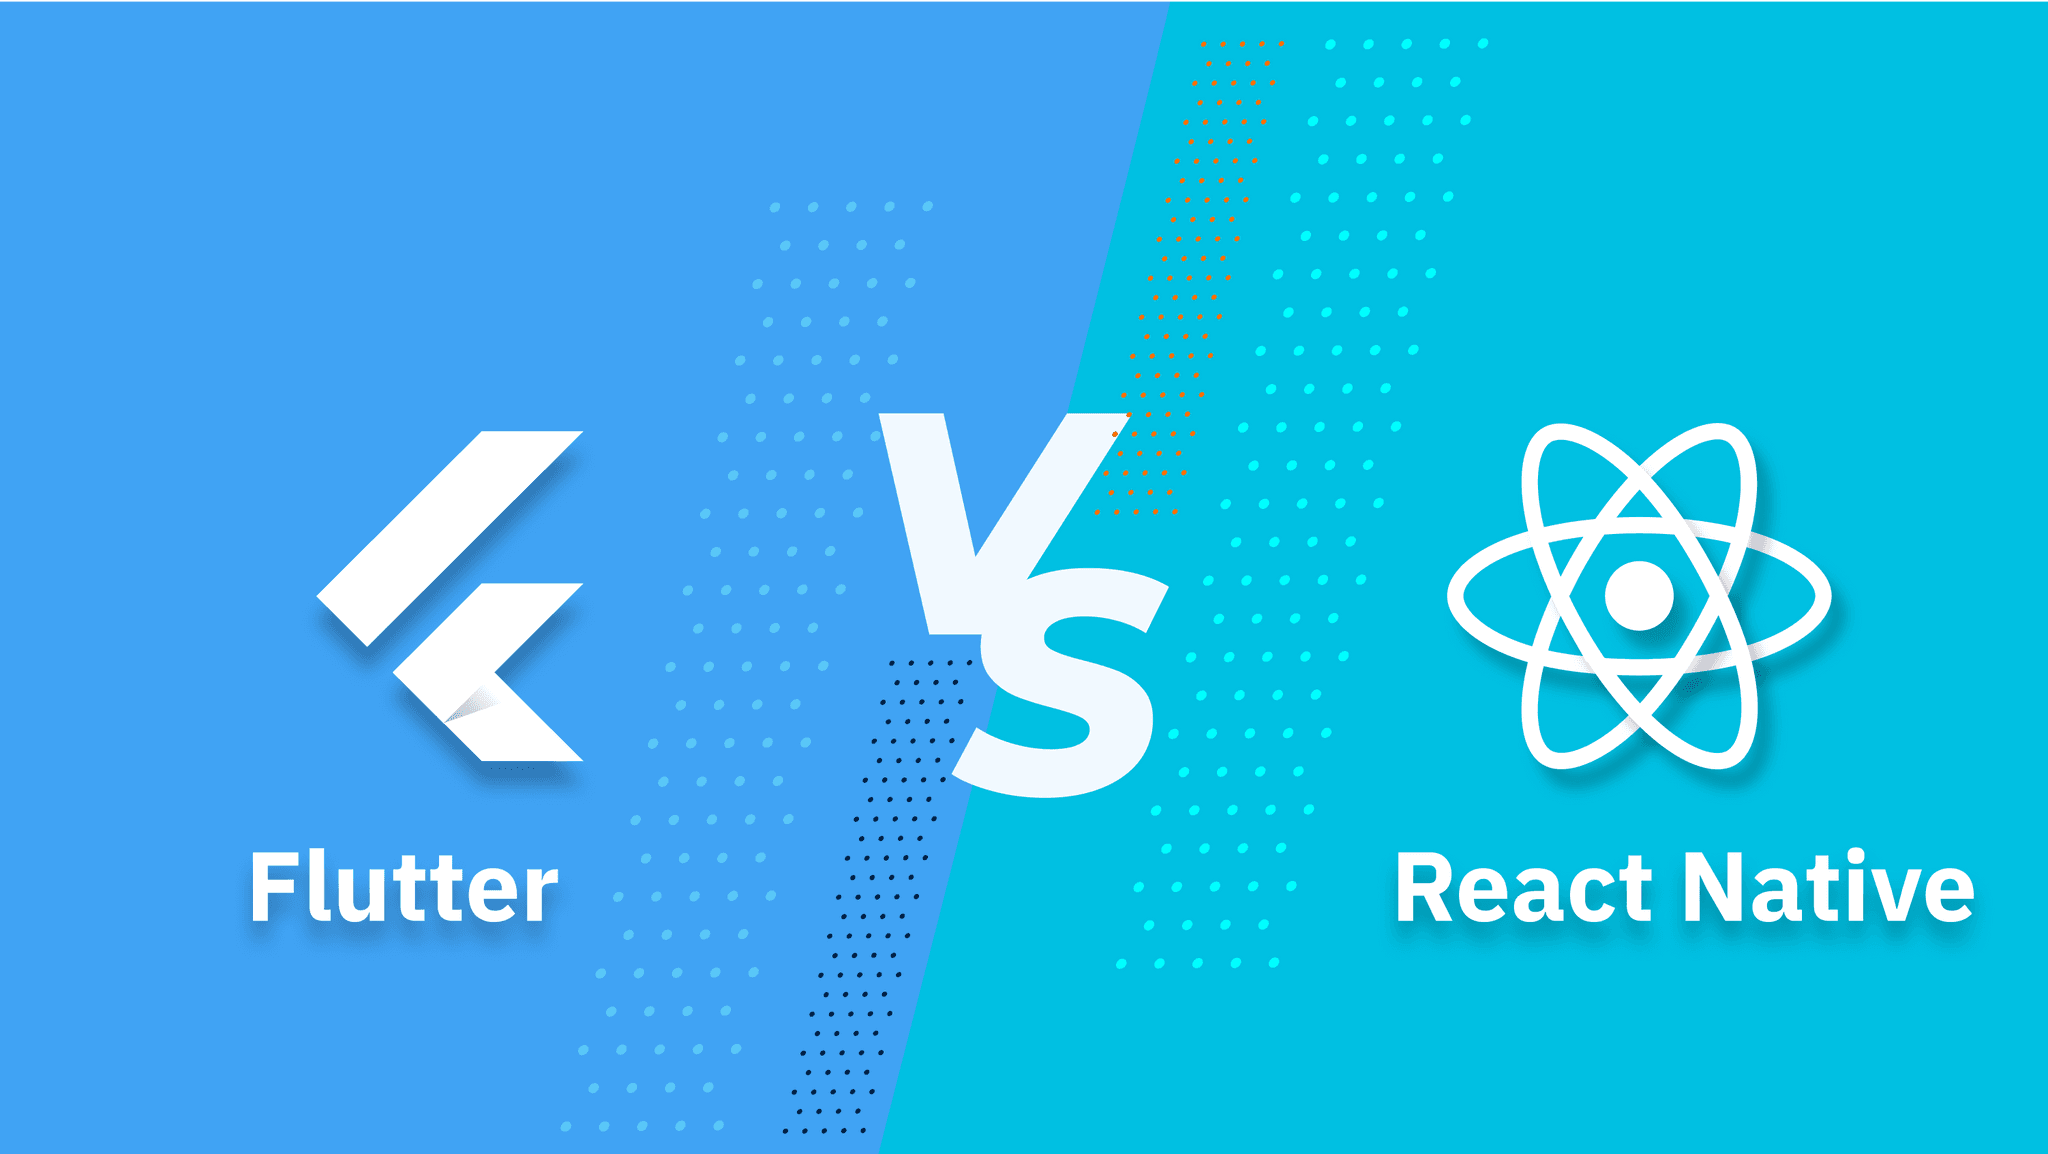 React Native VS Flutter: Which one is better?